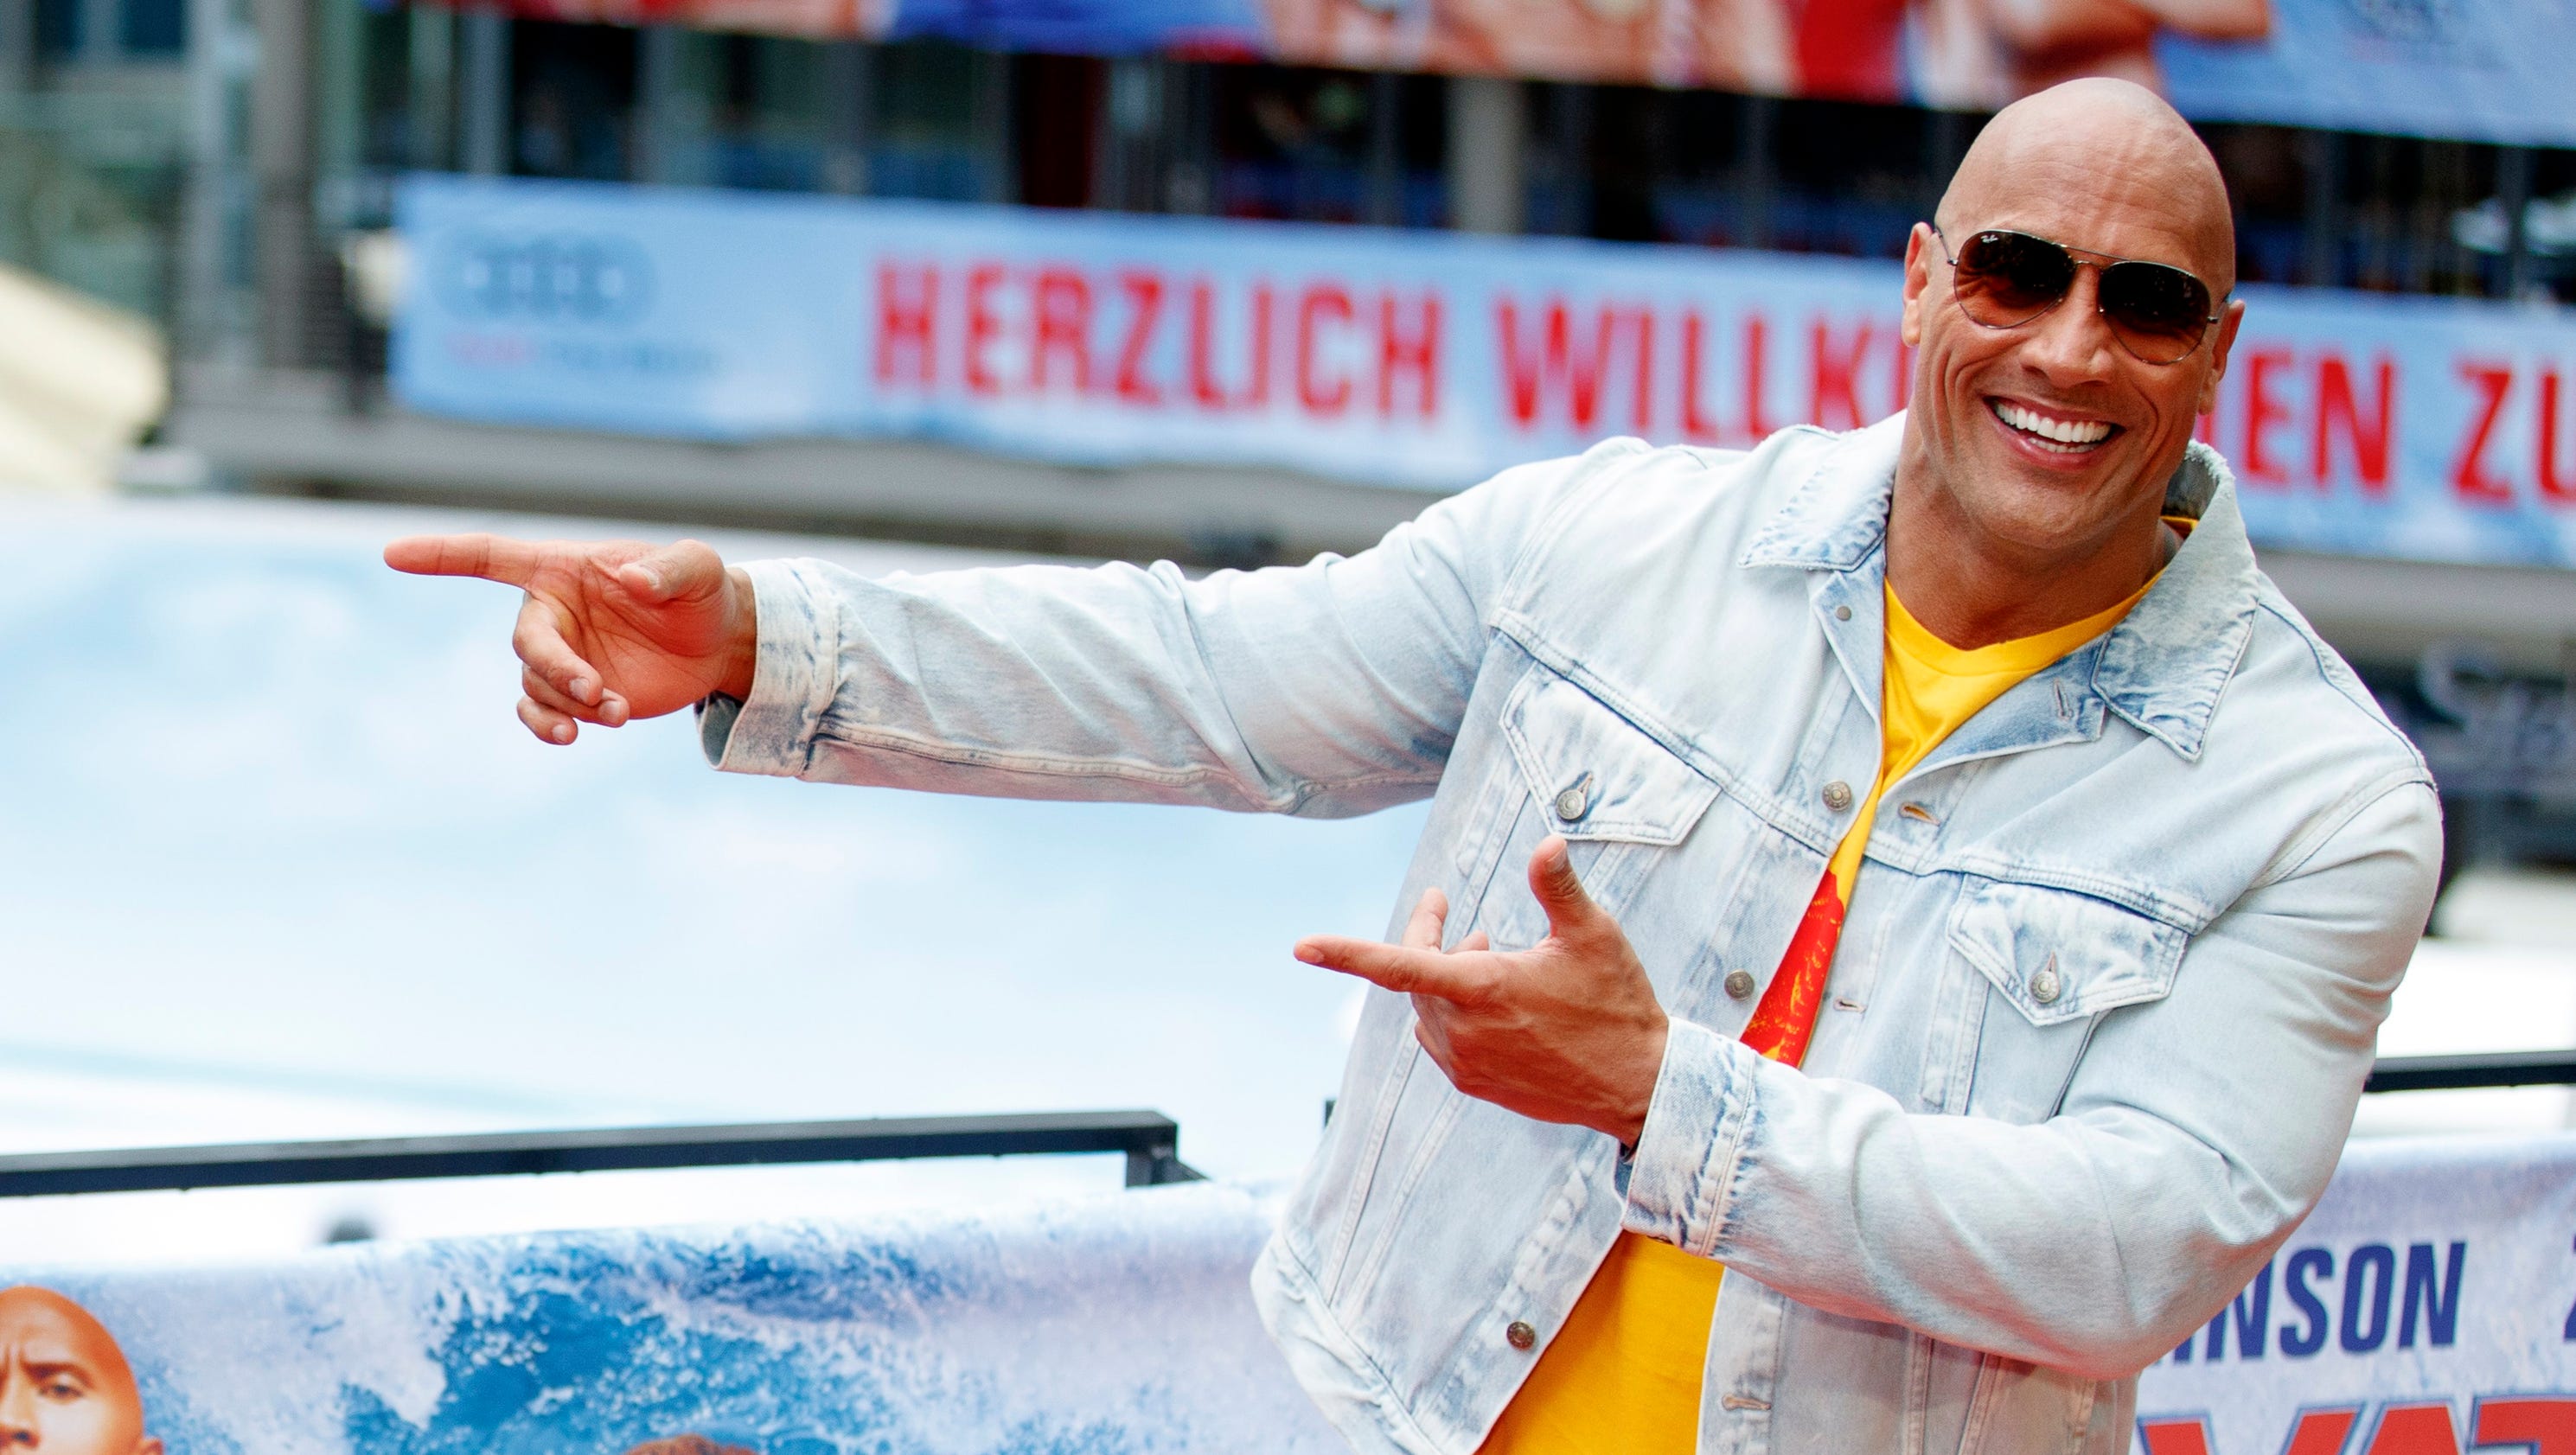 Will Dwayne Johnson run for president? This committee wants him to